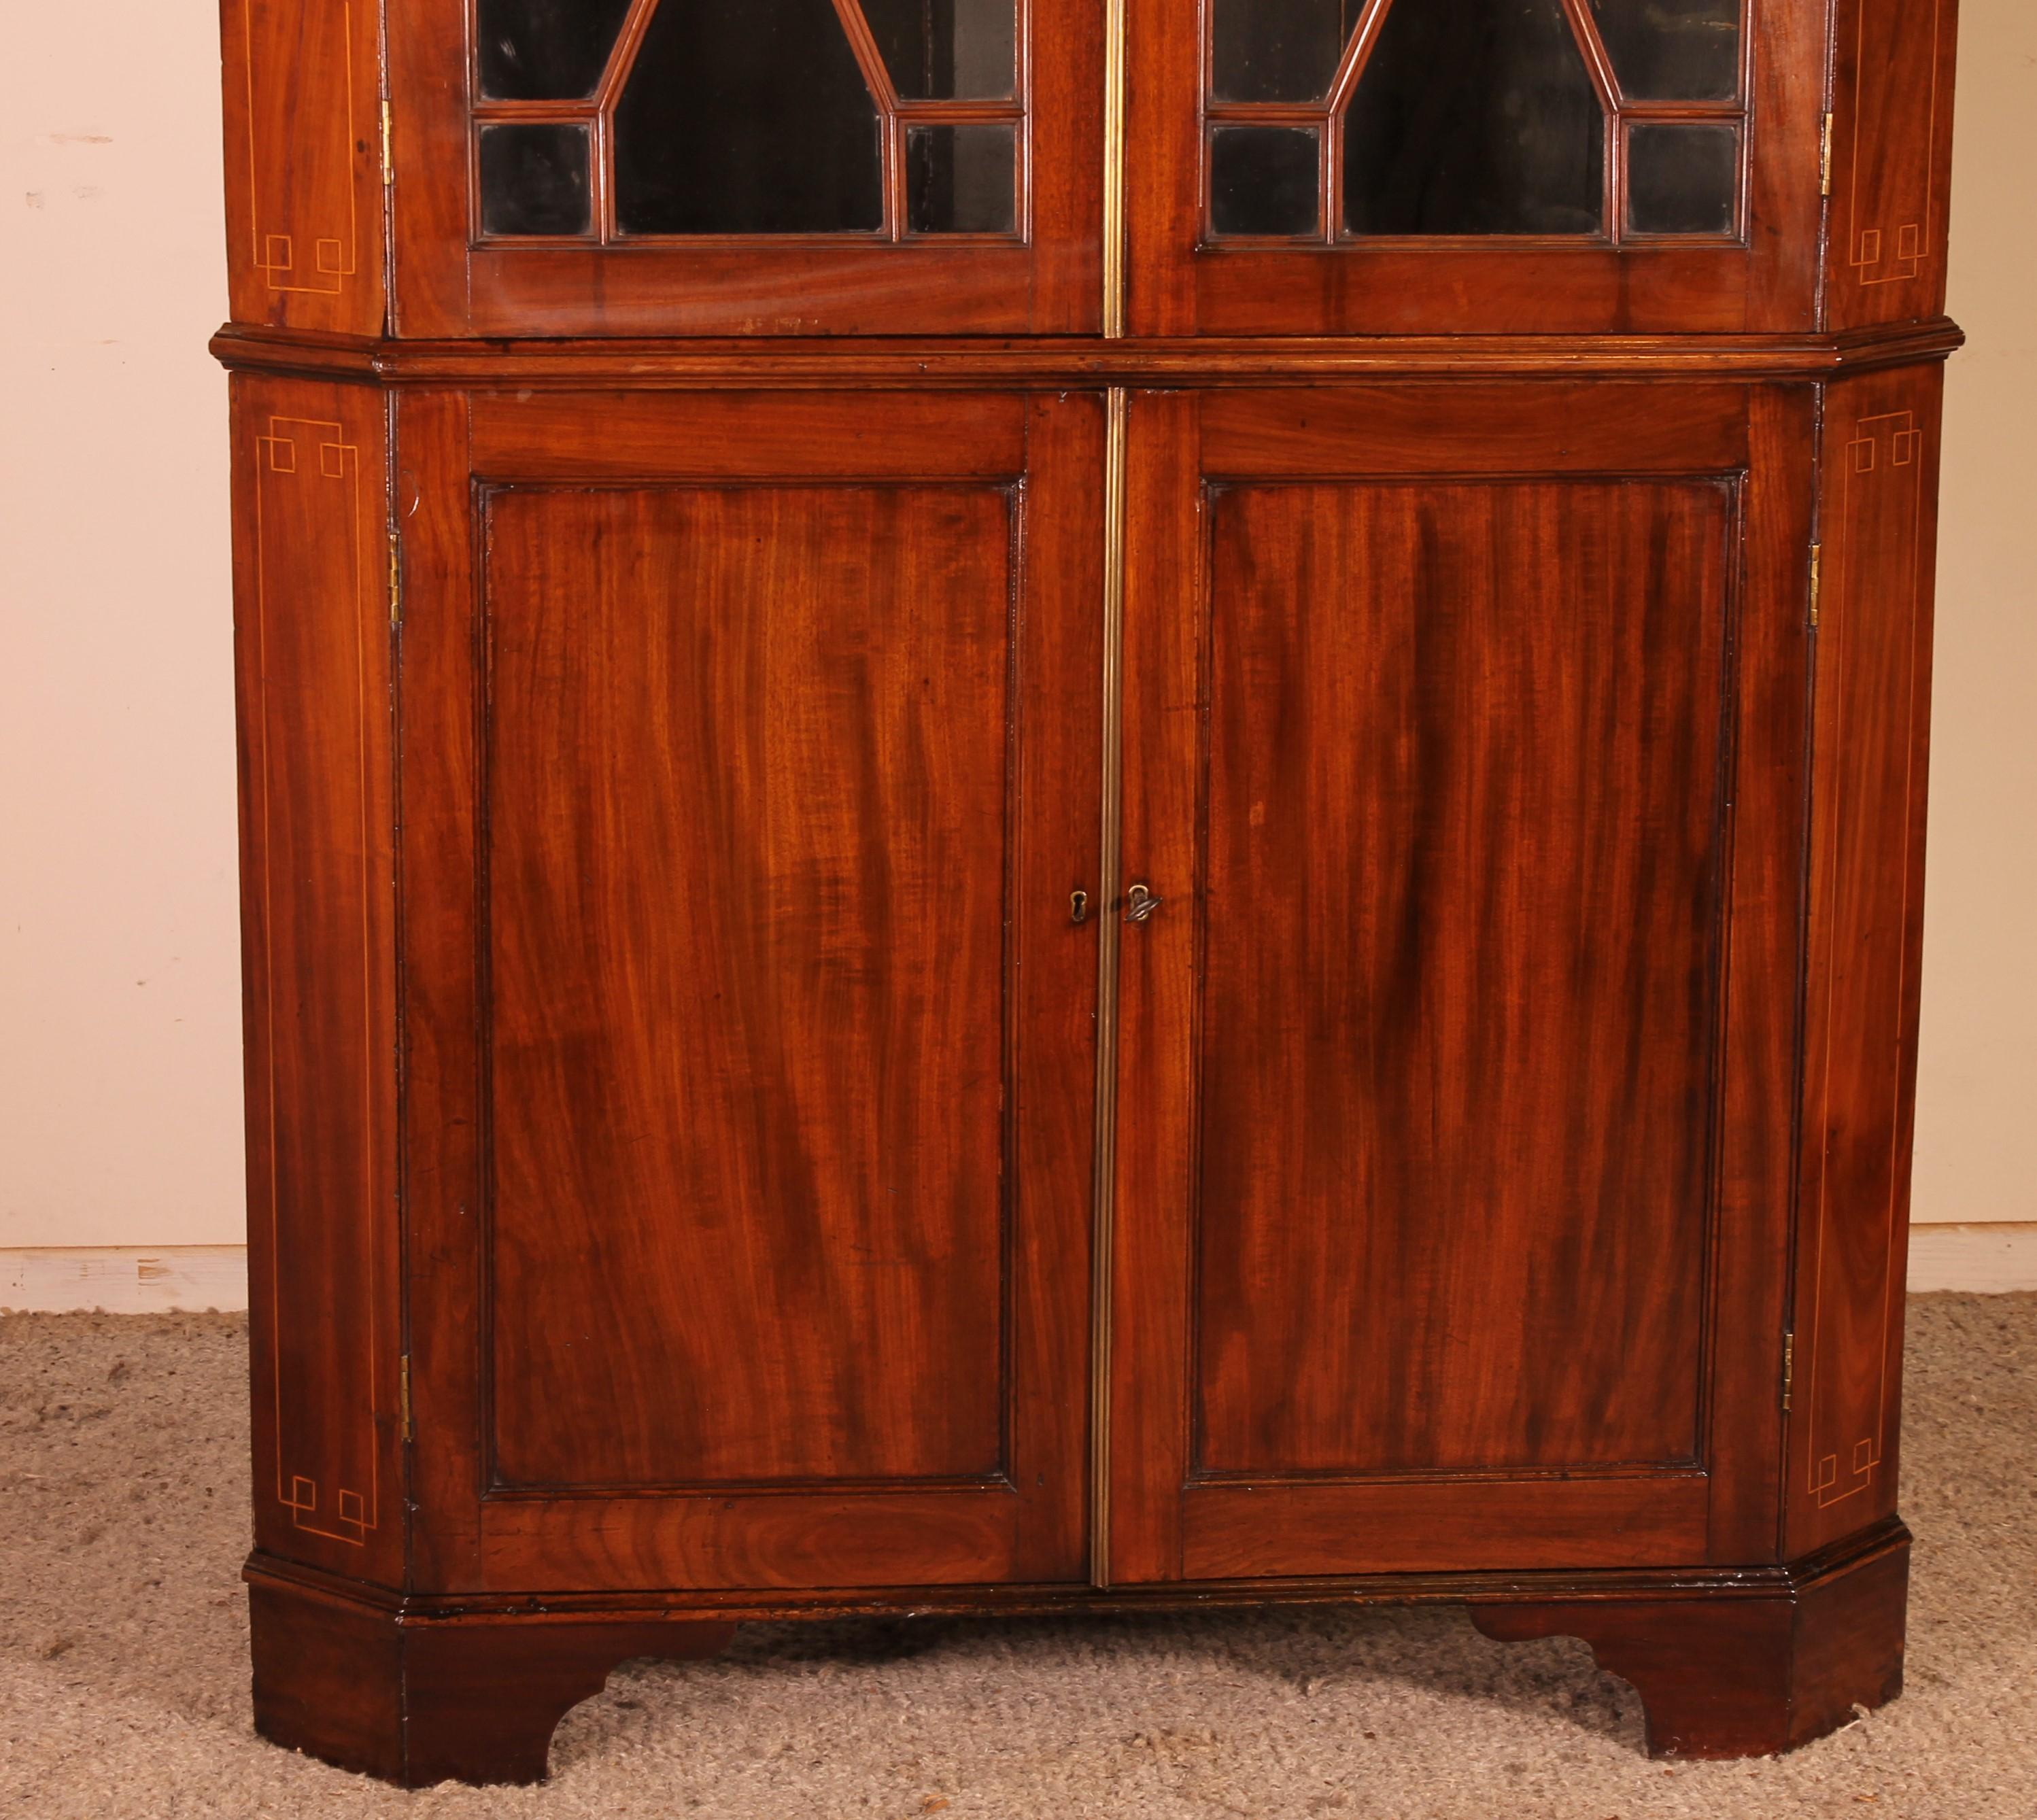 Elegant English mahogany corner cabinet from the 18th century

Very good quality corner cupboard which has braced windows. It is his original windows that are intact.

Very elegant model in two pieces with a lemon wood inlay on the top and